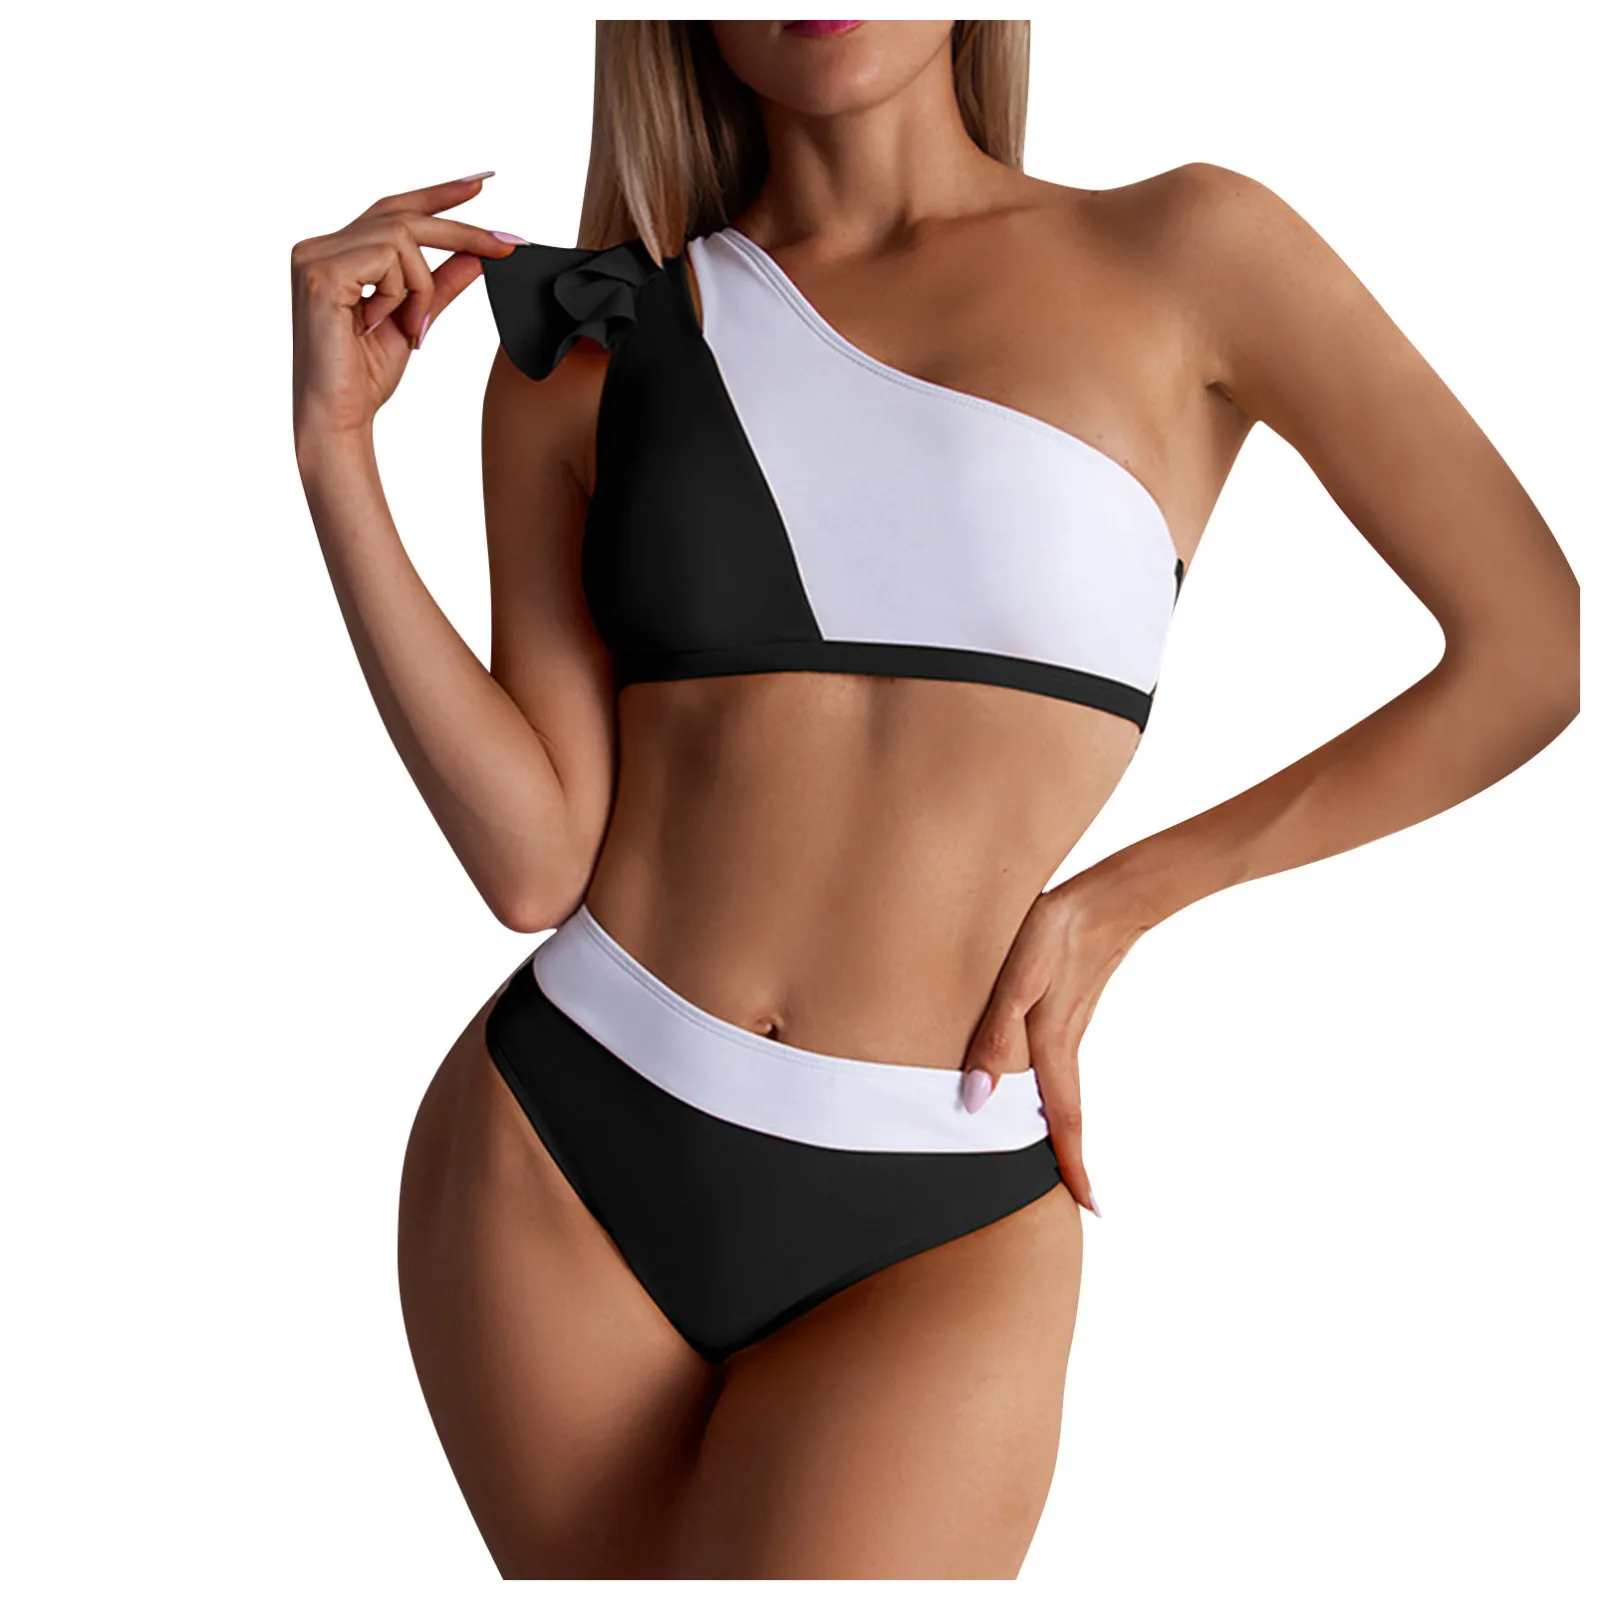 bathing suits Women High Waist Colorful Split One-shoulder Bikini With Chest Pad Without Steel Bra Swimsuit 2022 Sexy Women High Waist Bikini bathing suits